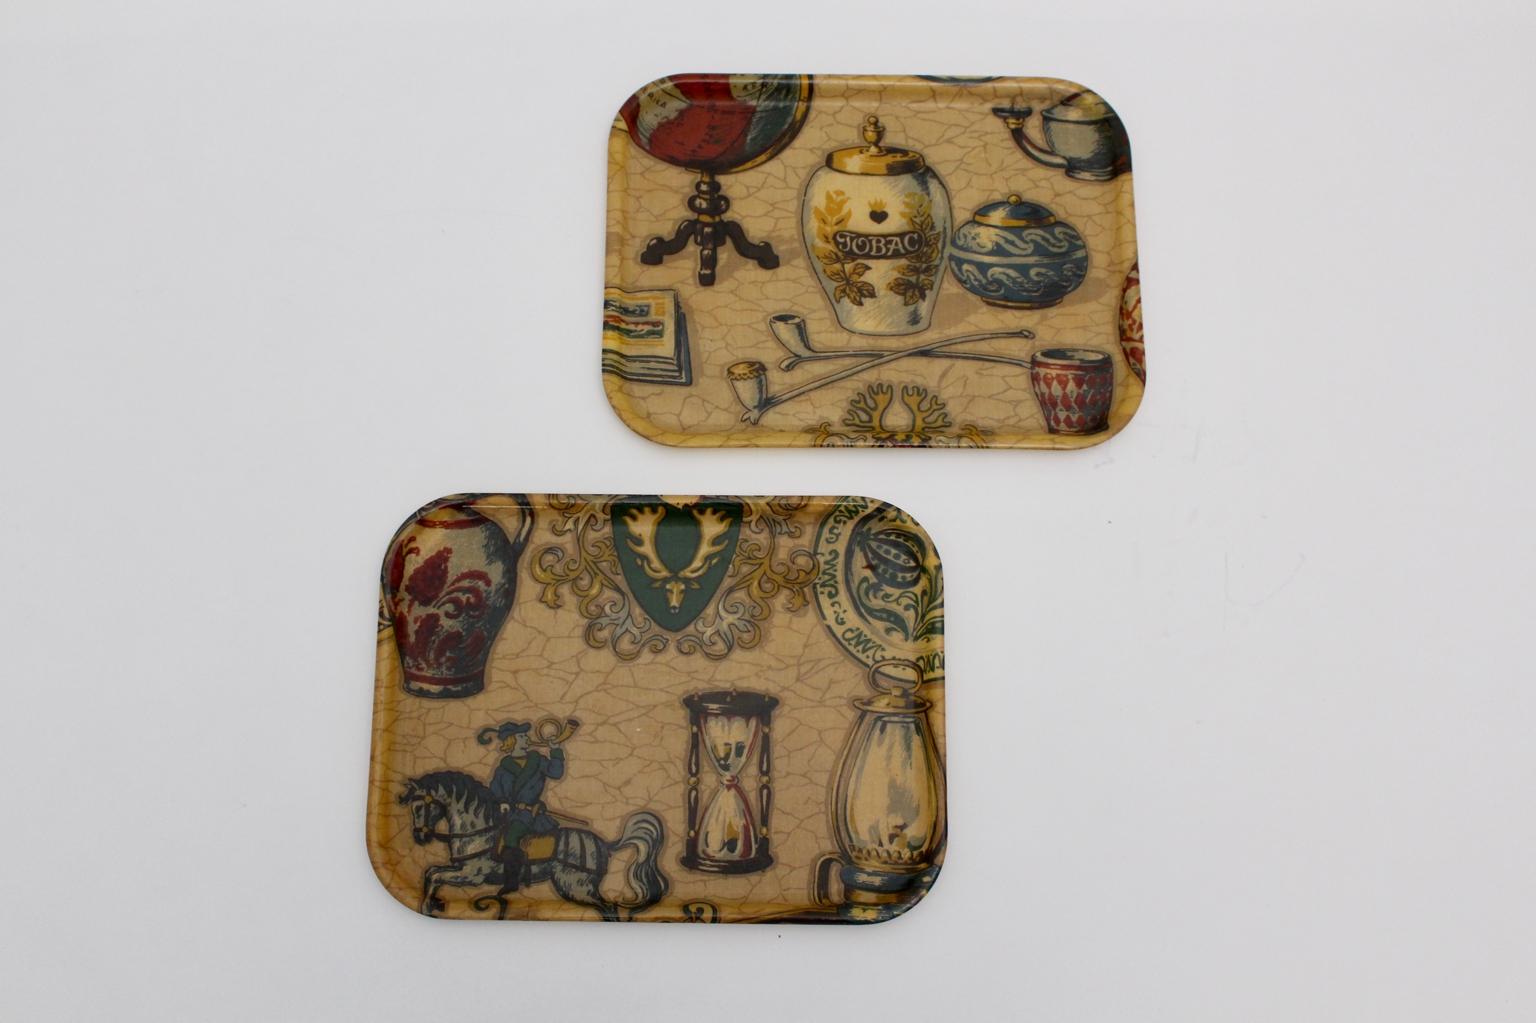 This set of serving trays are printed with multicolored various motifs. very good vintage condition.
Both platters have the same approx. measures:
Length: 35.5 cm
Width: 26.5 cm
Height: 1.8 cm.